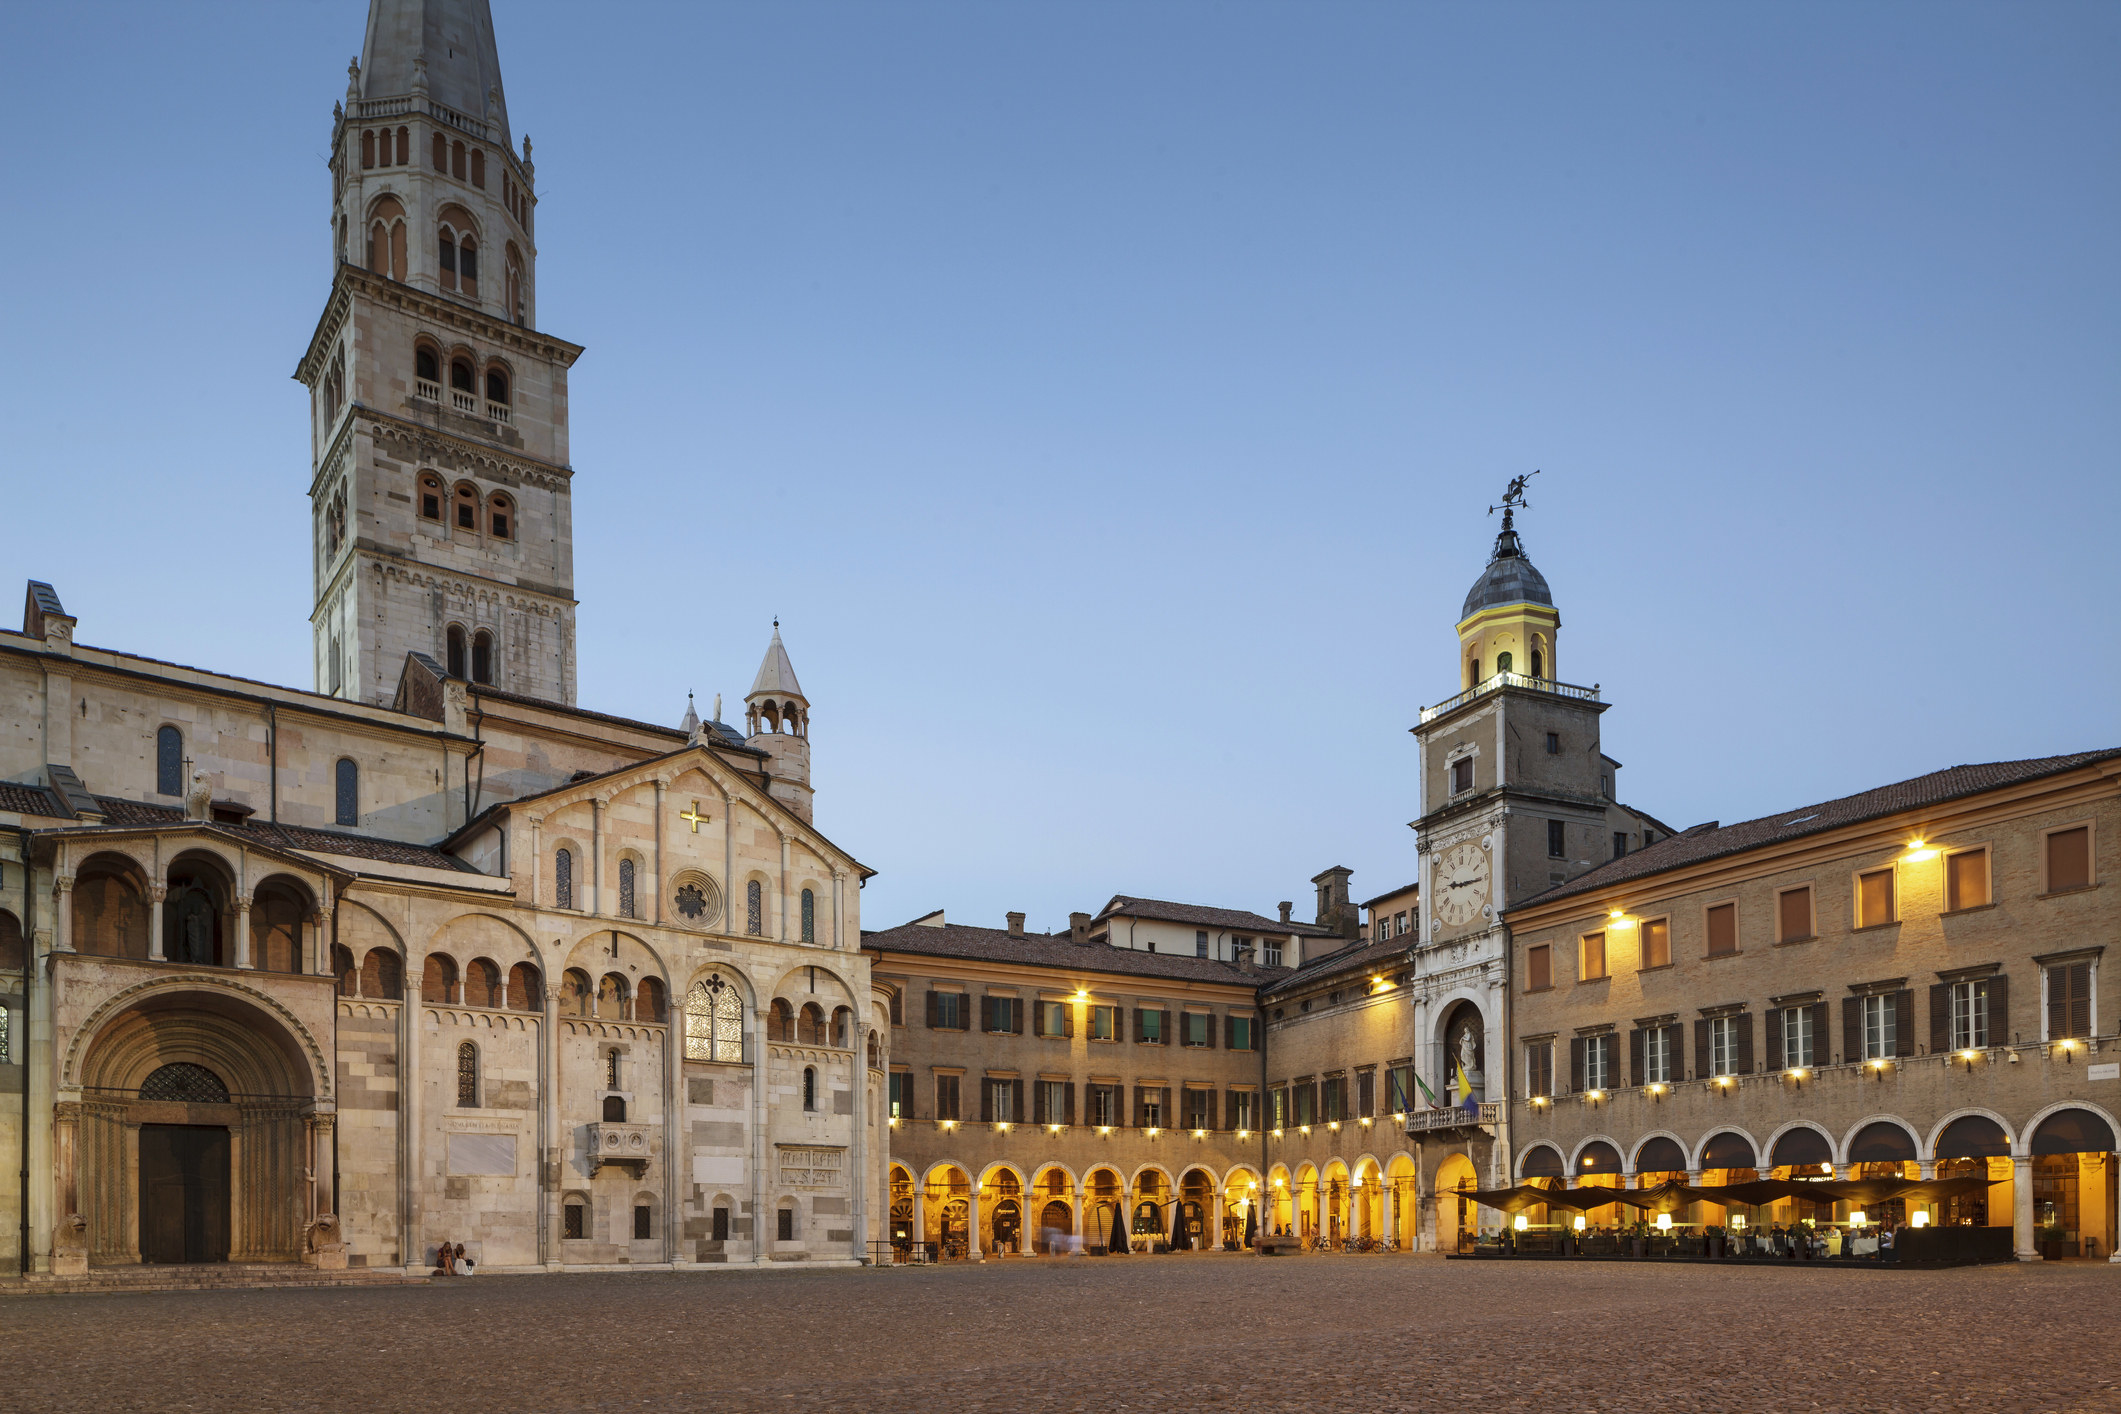 A cathedral and a town square in an Italian city